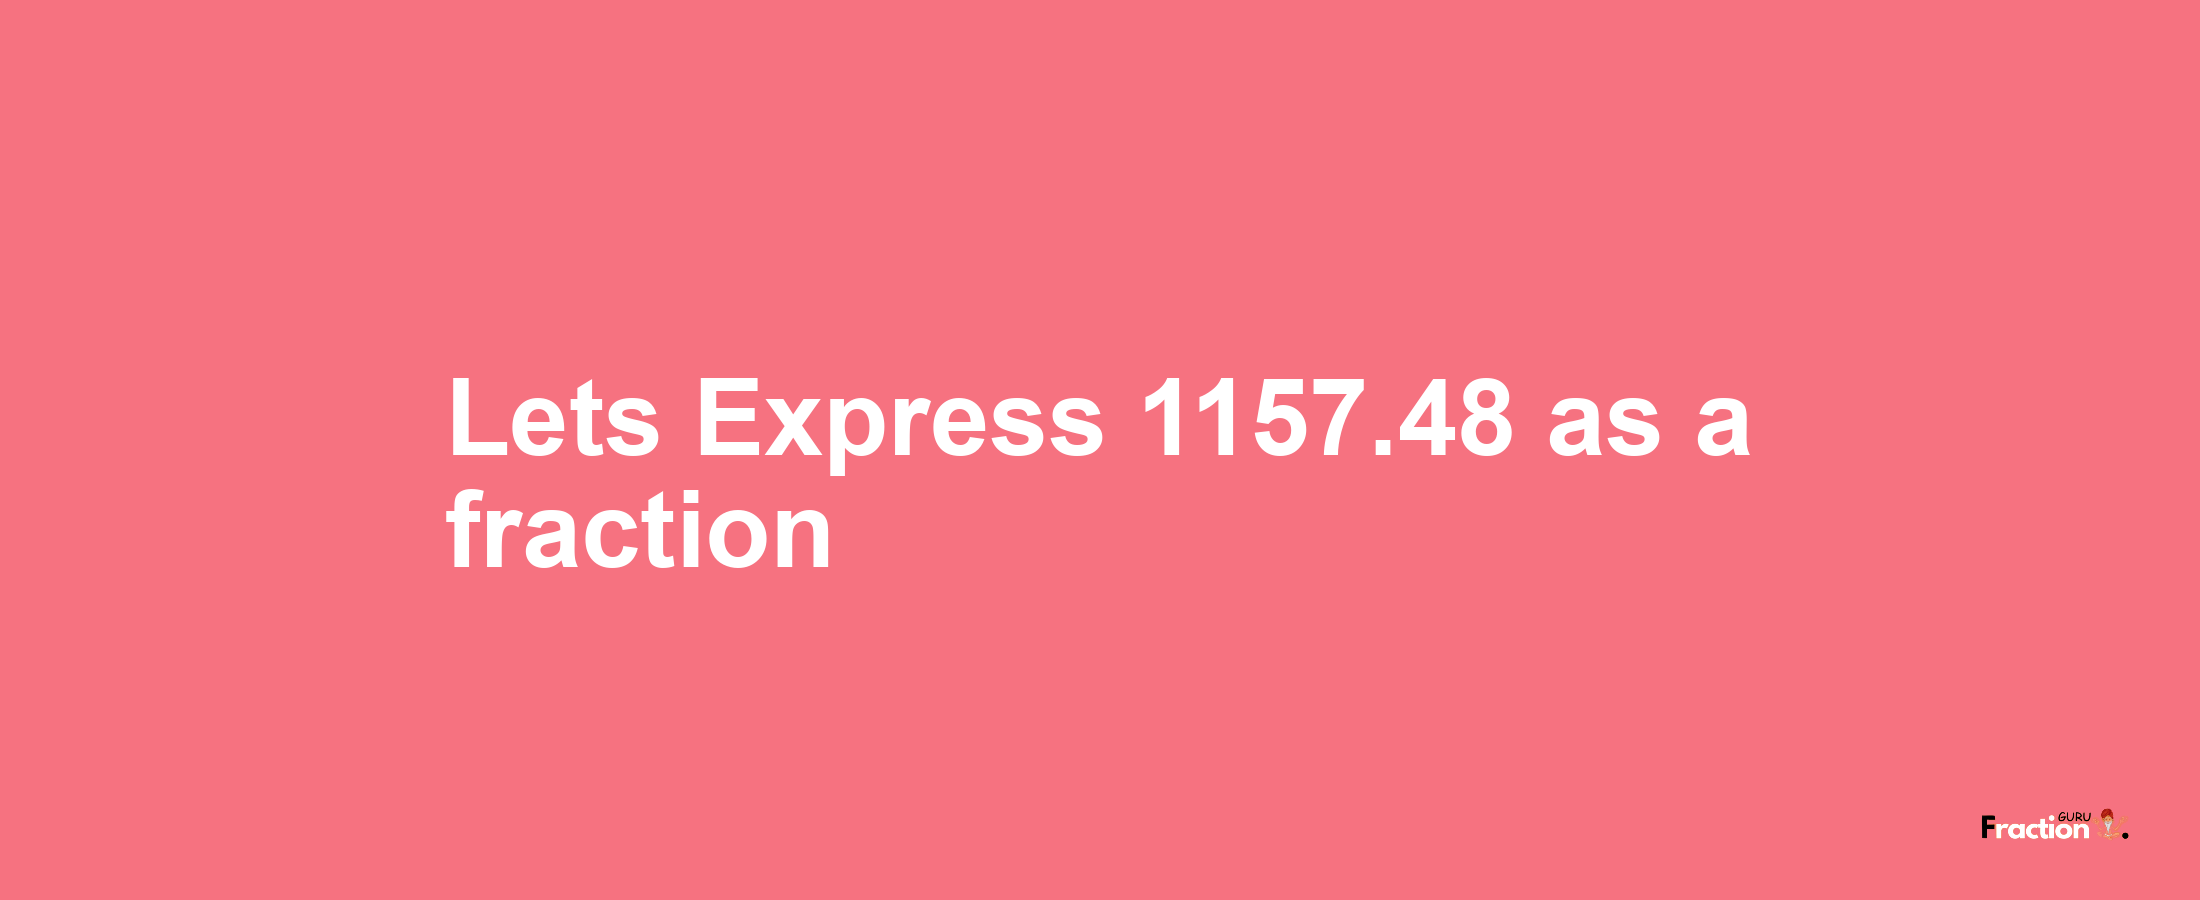 Lets Express 1157.48 as afraction